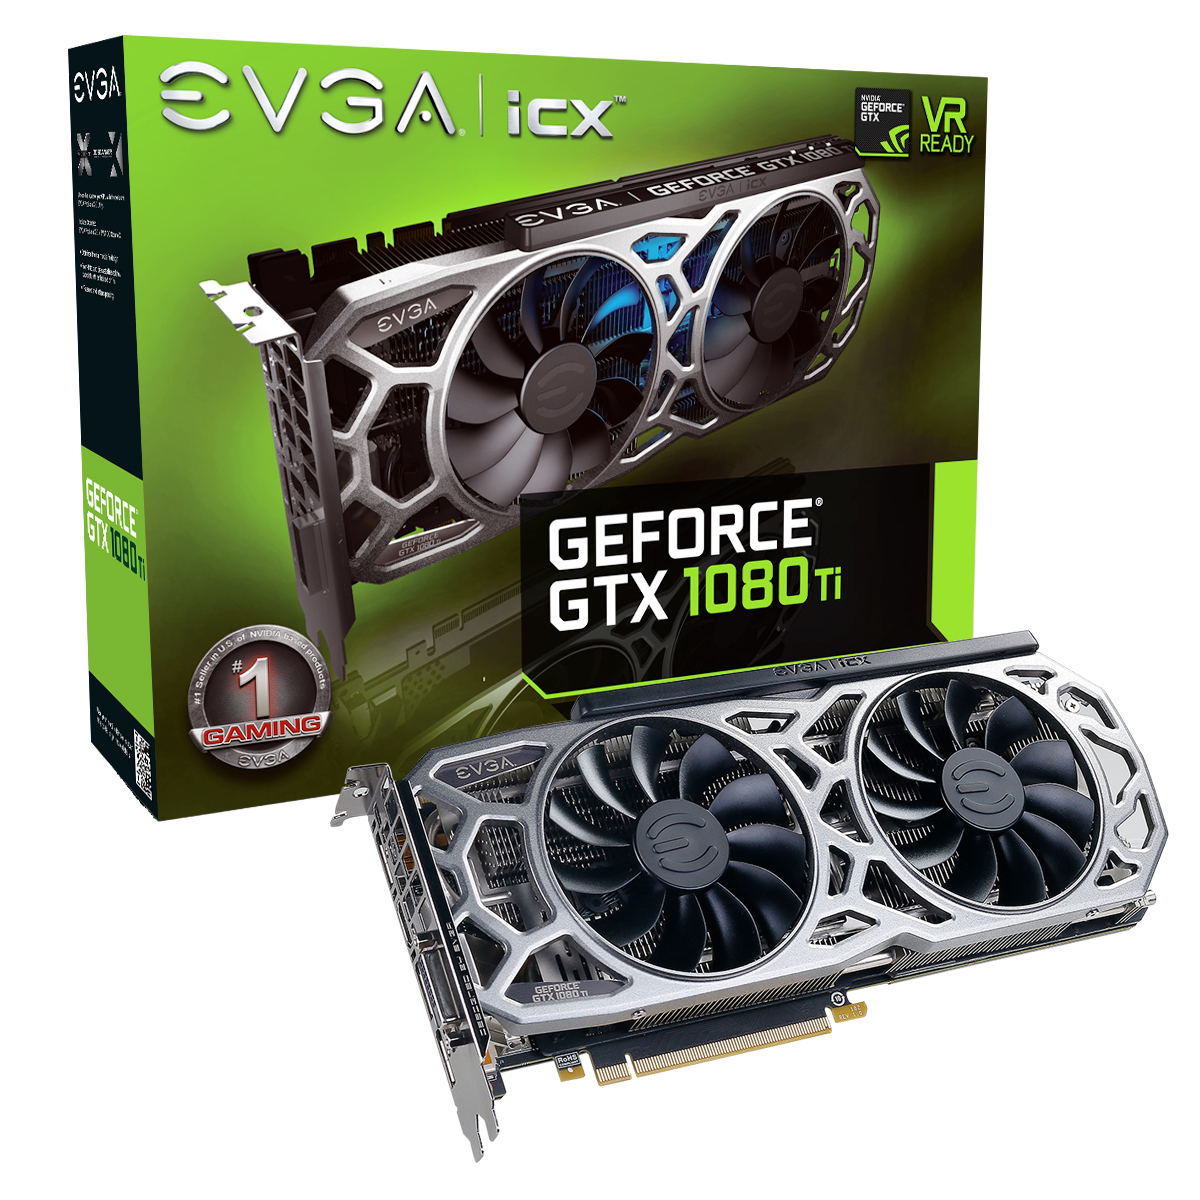 Media asset in full size related to 3dfxzone.it news item entitled as follows: EVGA pubblica le frequenze di clock delle sue video card GeForce GTX 1080 Ti | Image Name: news26034_EVGA-GeForce-GTX-1080-Ti-SC2-Gaming_1.jpg